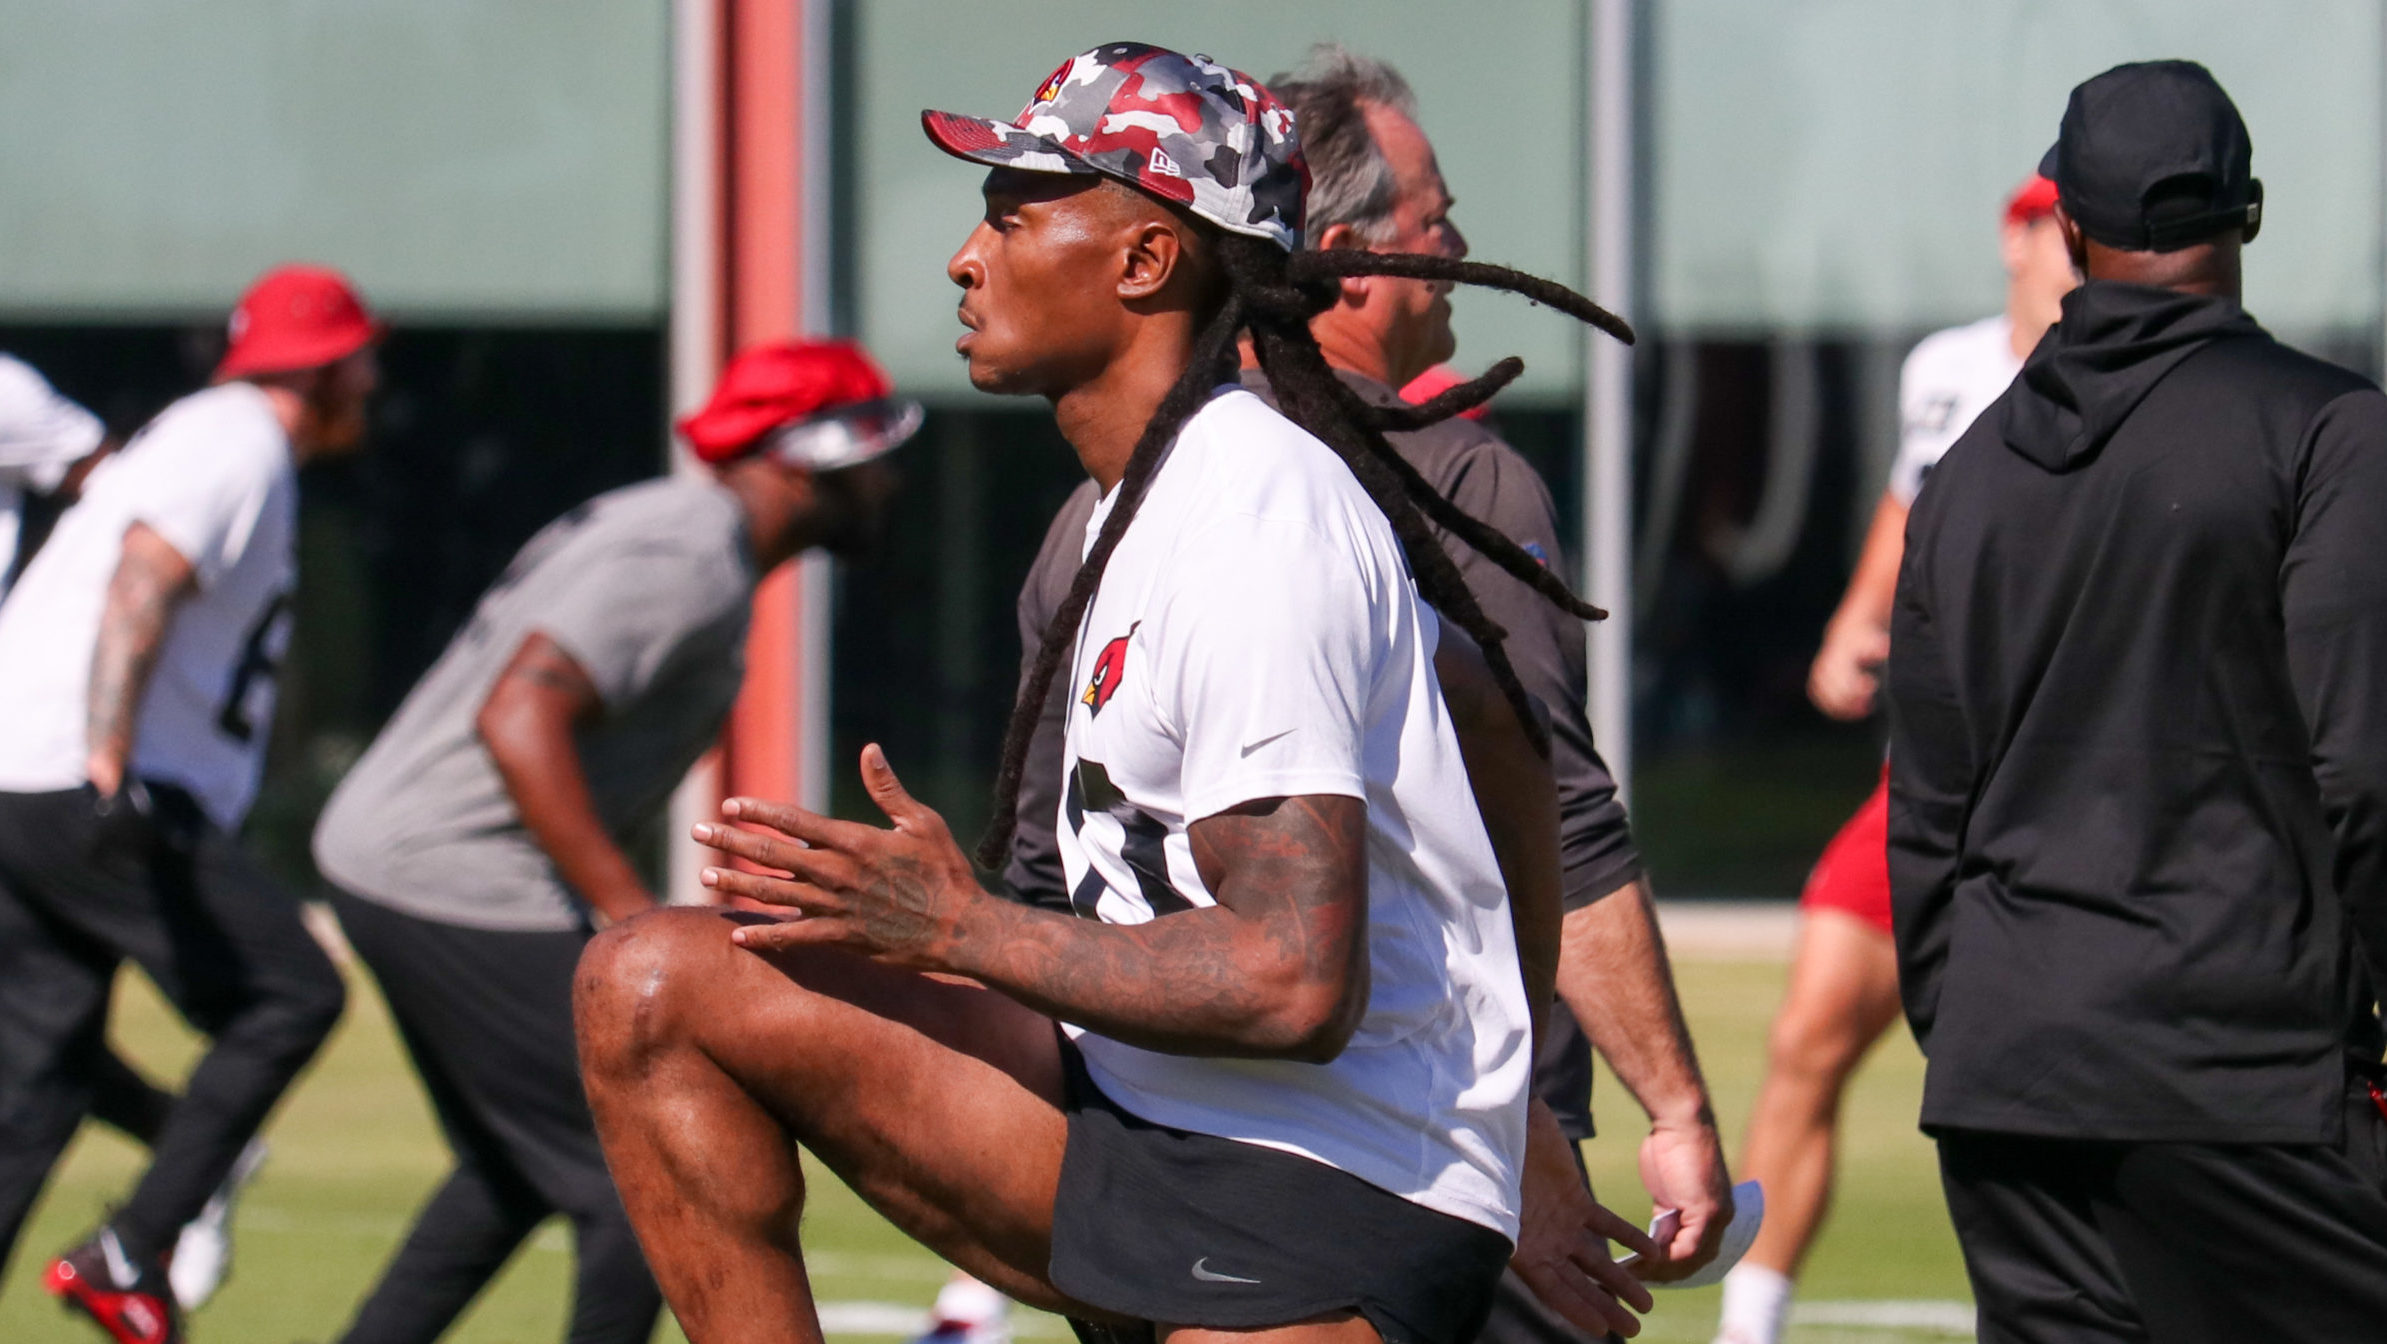 Arizona Cardinals WR DeAndre Hopkins during practice on Tuesday, Oc.t 18, 2022, in Tempe. (Tyler Dr...